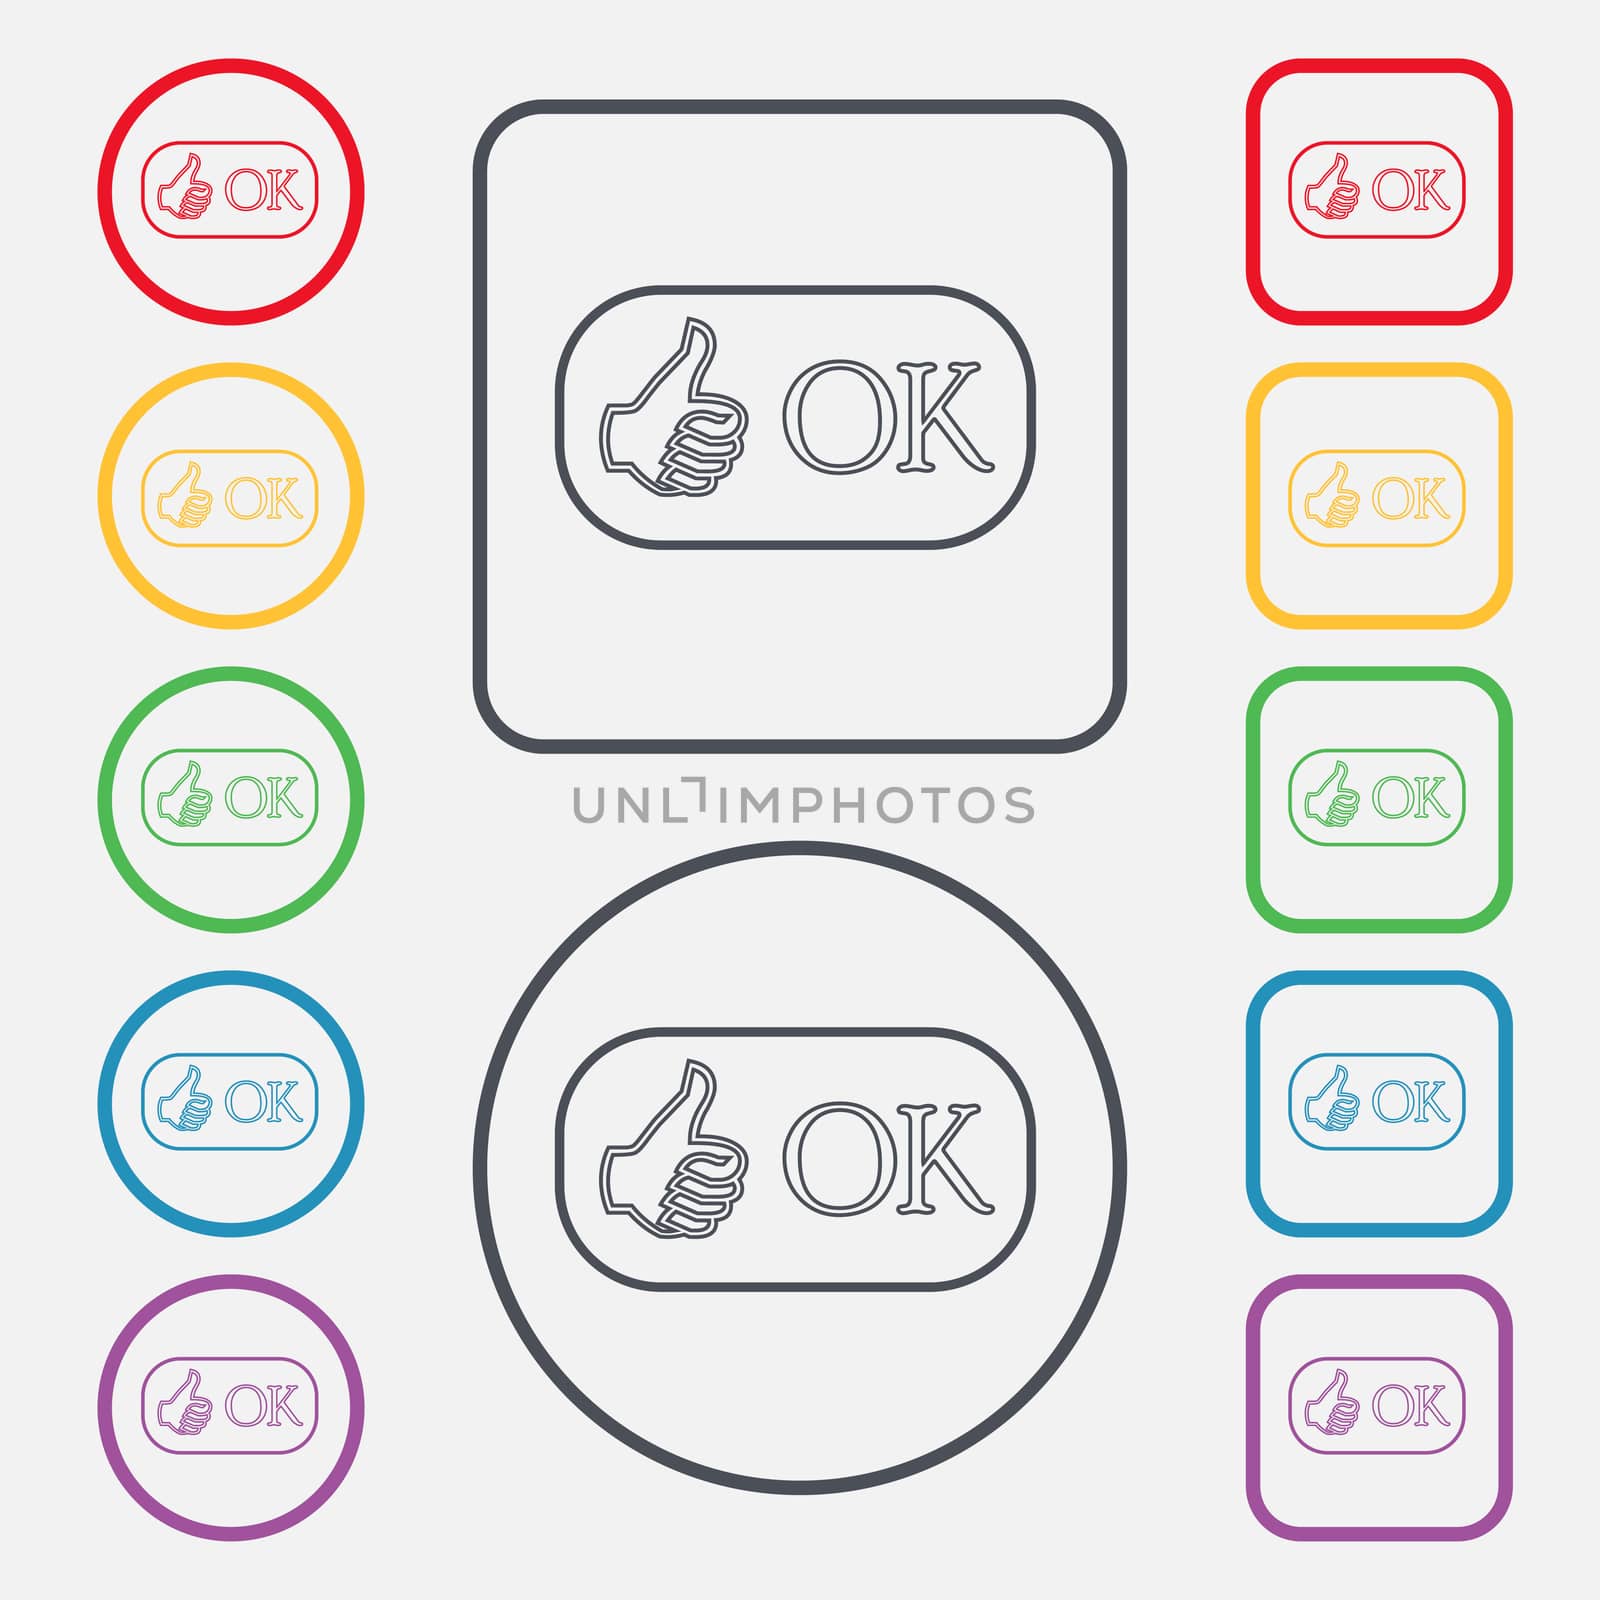 OK sign icon. Positive check symbol. Set of colored buttons.  by serhii_lohvyniuk